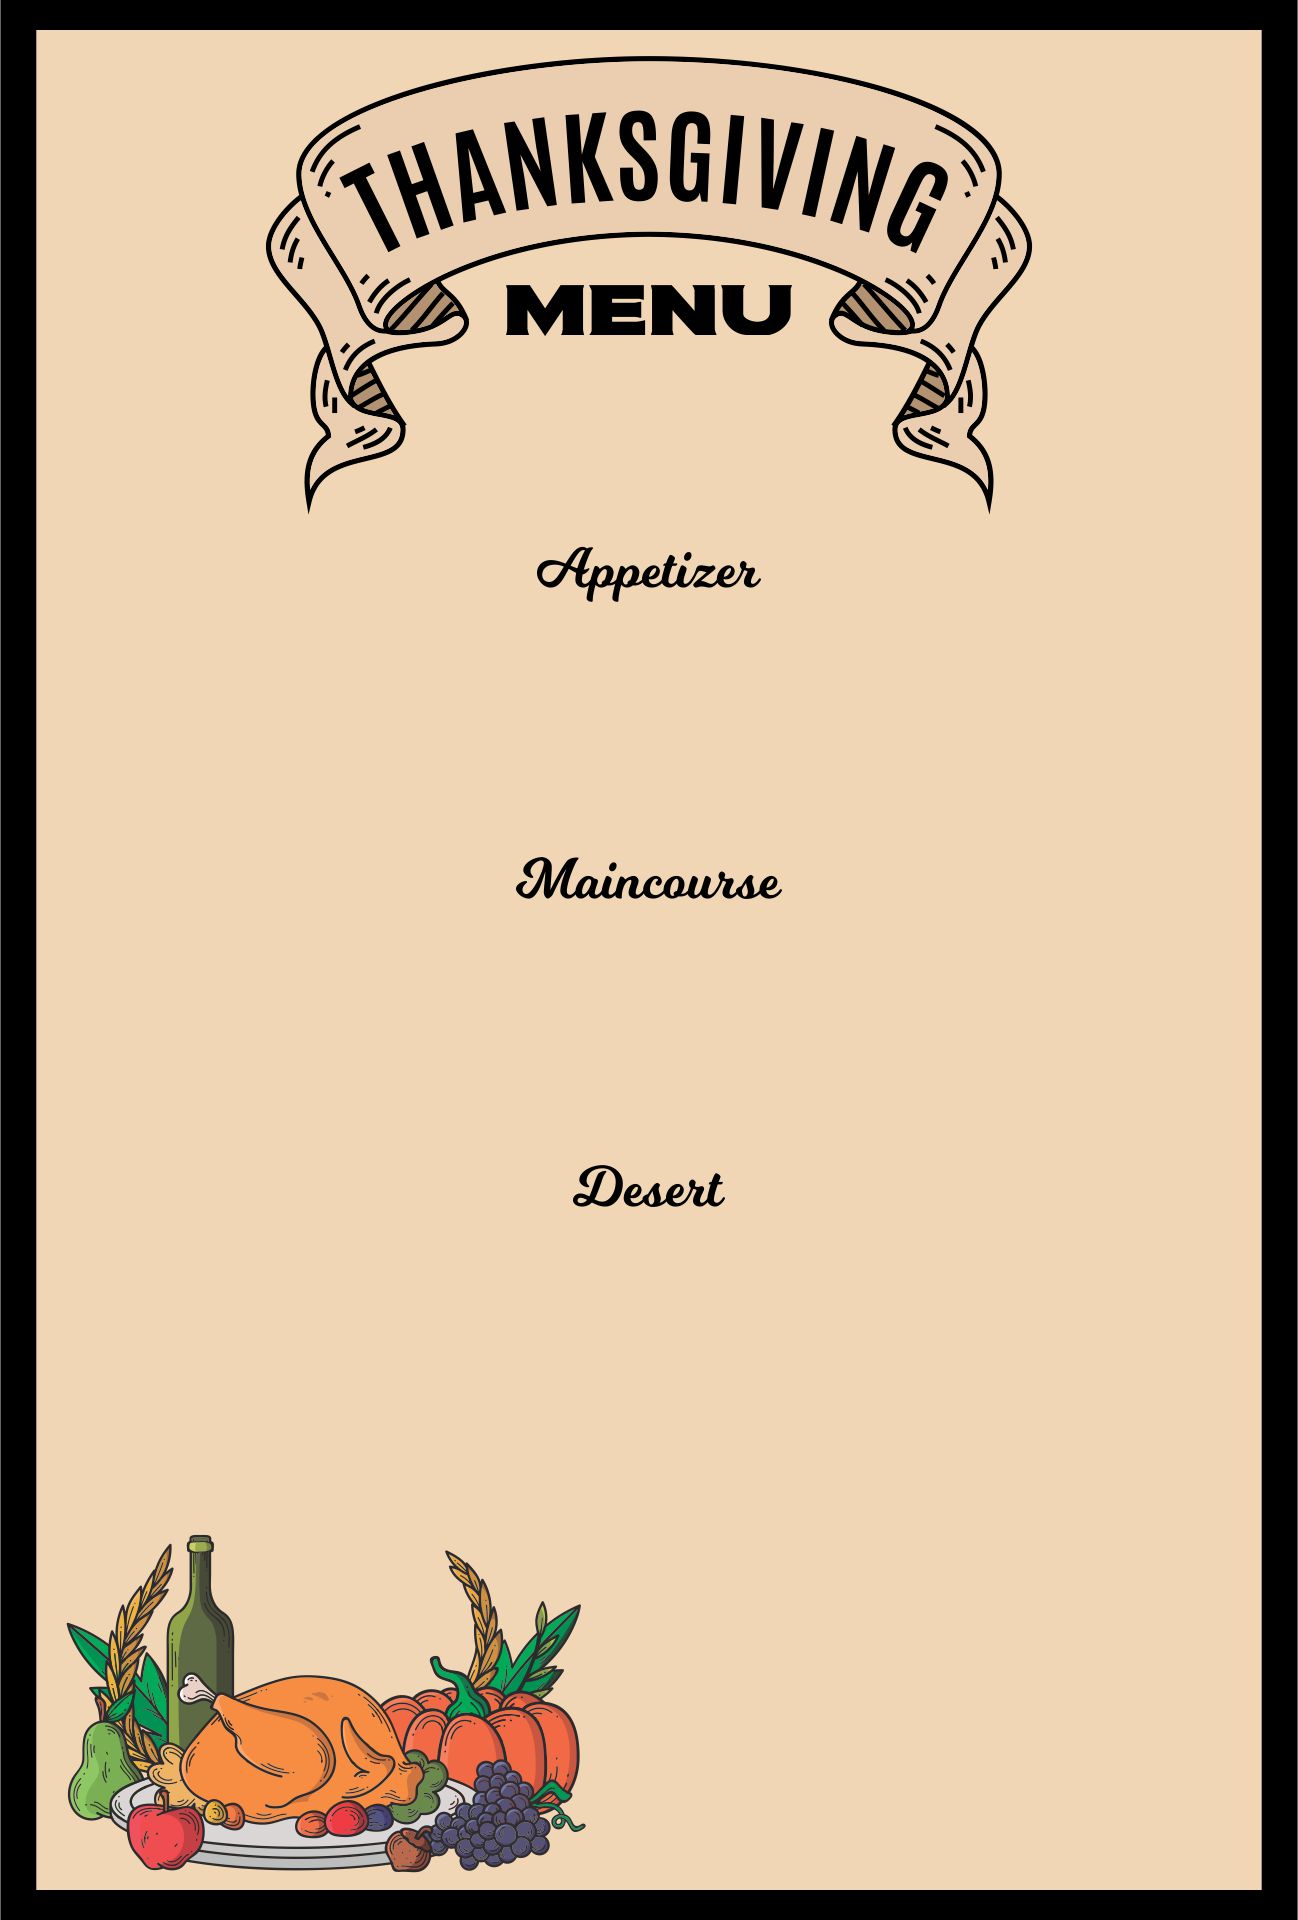 8-best-images-of-free-thanksgiving-printable-card-templates-thanksgiving-menu-templates-free